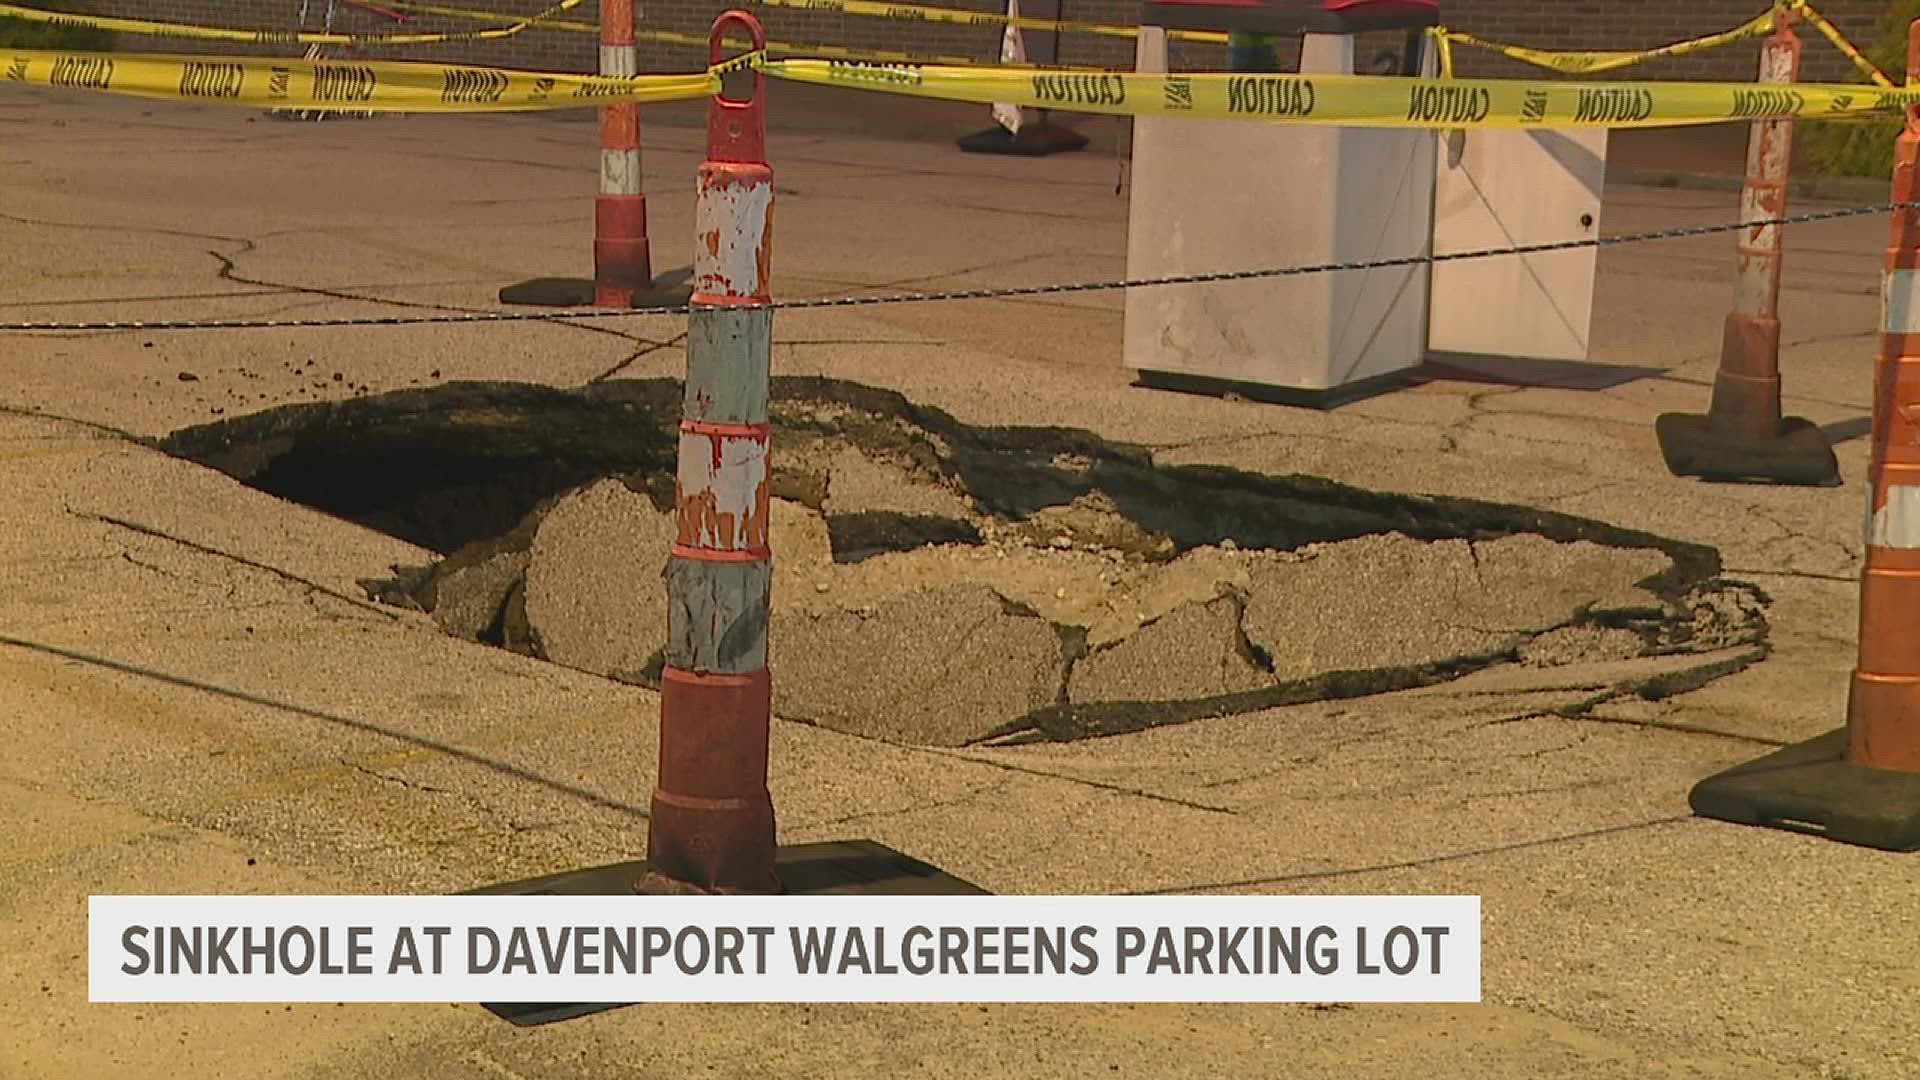 Part of the parking lot of the Davenport Walgreens on Kimberly Road and Eastern Avenue has caved in, though the business is still open.